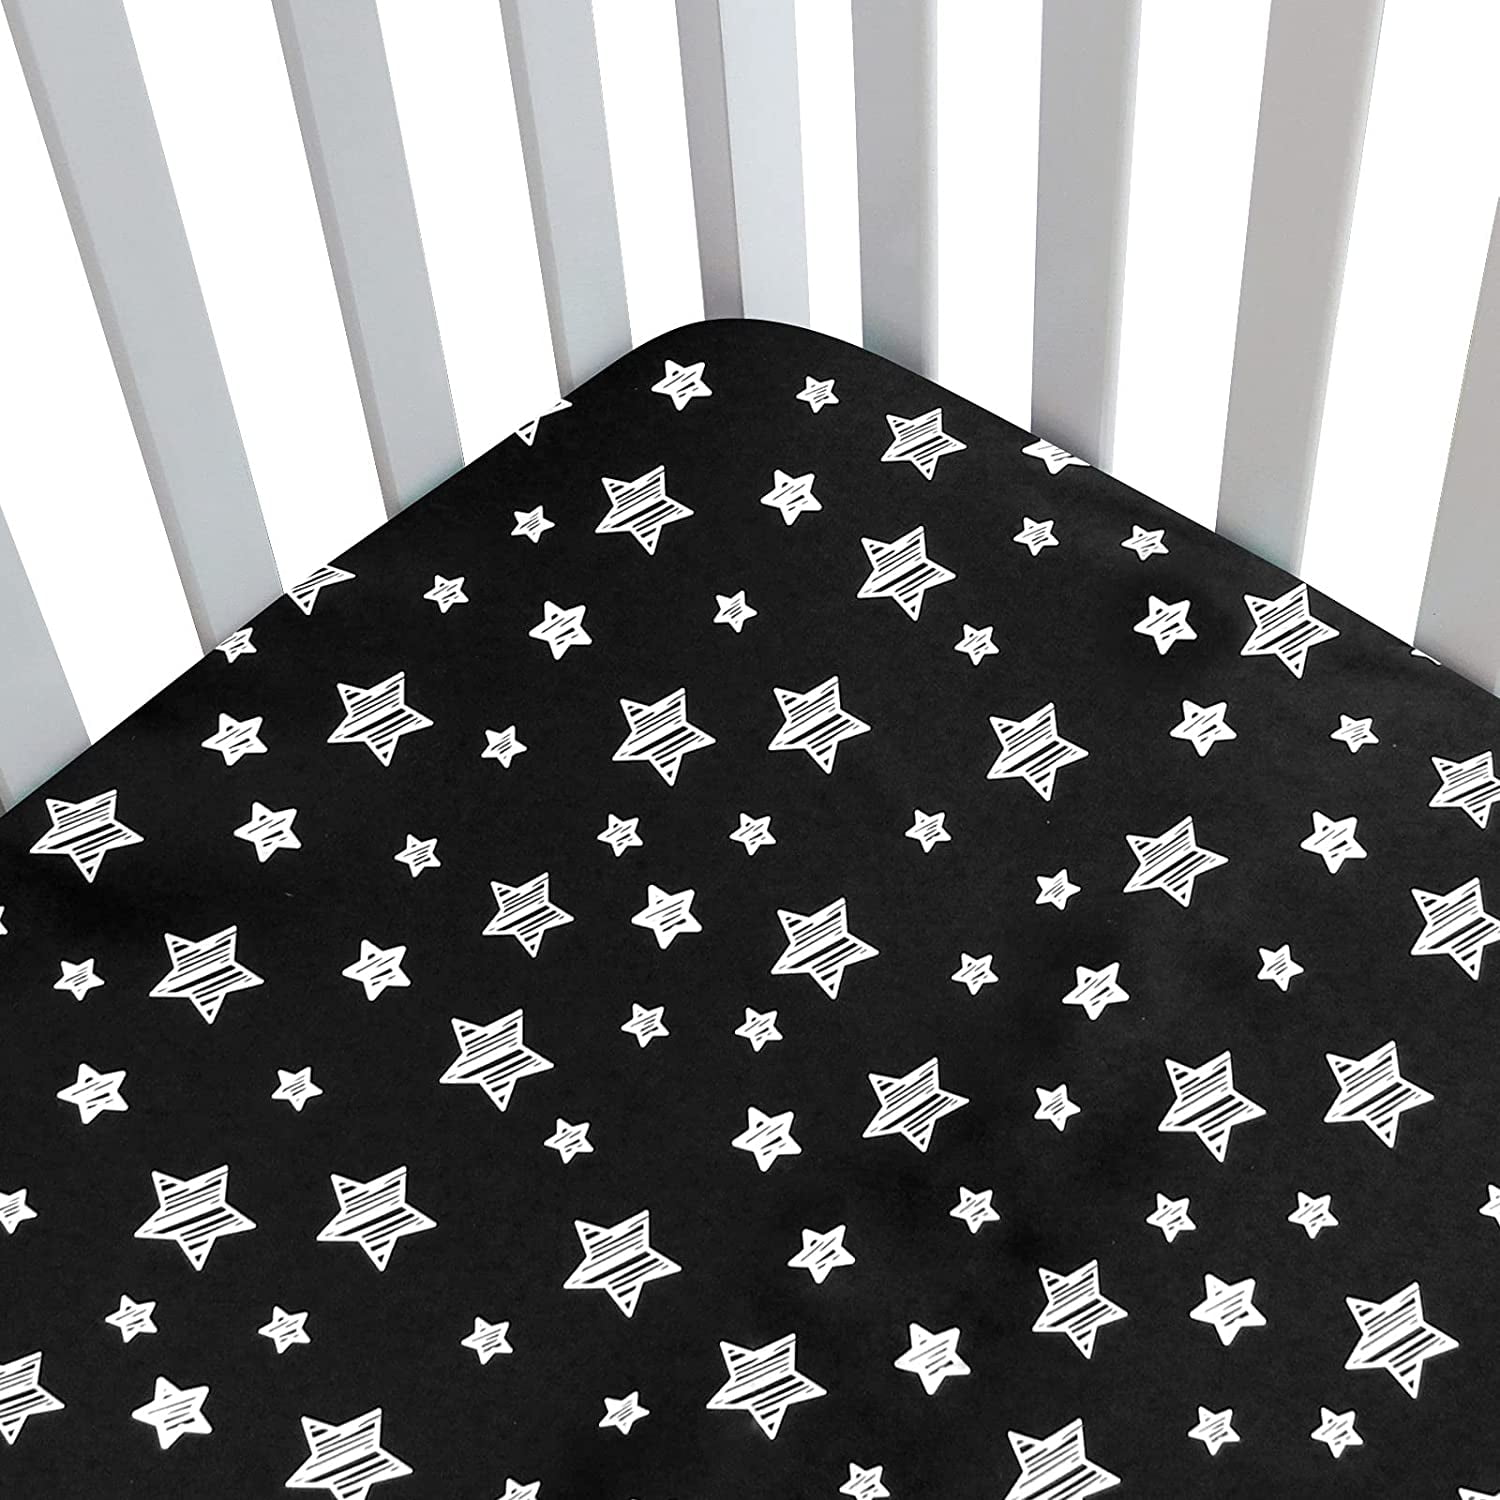 Black FLXXIE Microfiber Toddler Soft Fitted Sheets 28x 52 2 Pack Breathable Cozy Baby Mattress Crib Sheets for Boys and Girls 